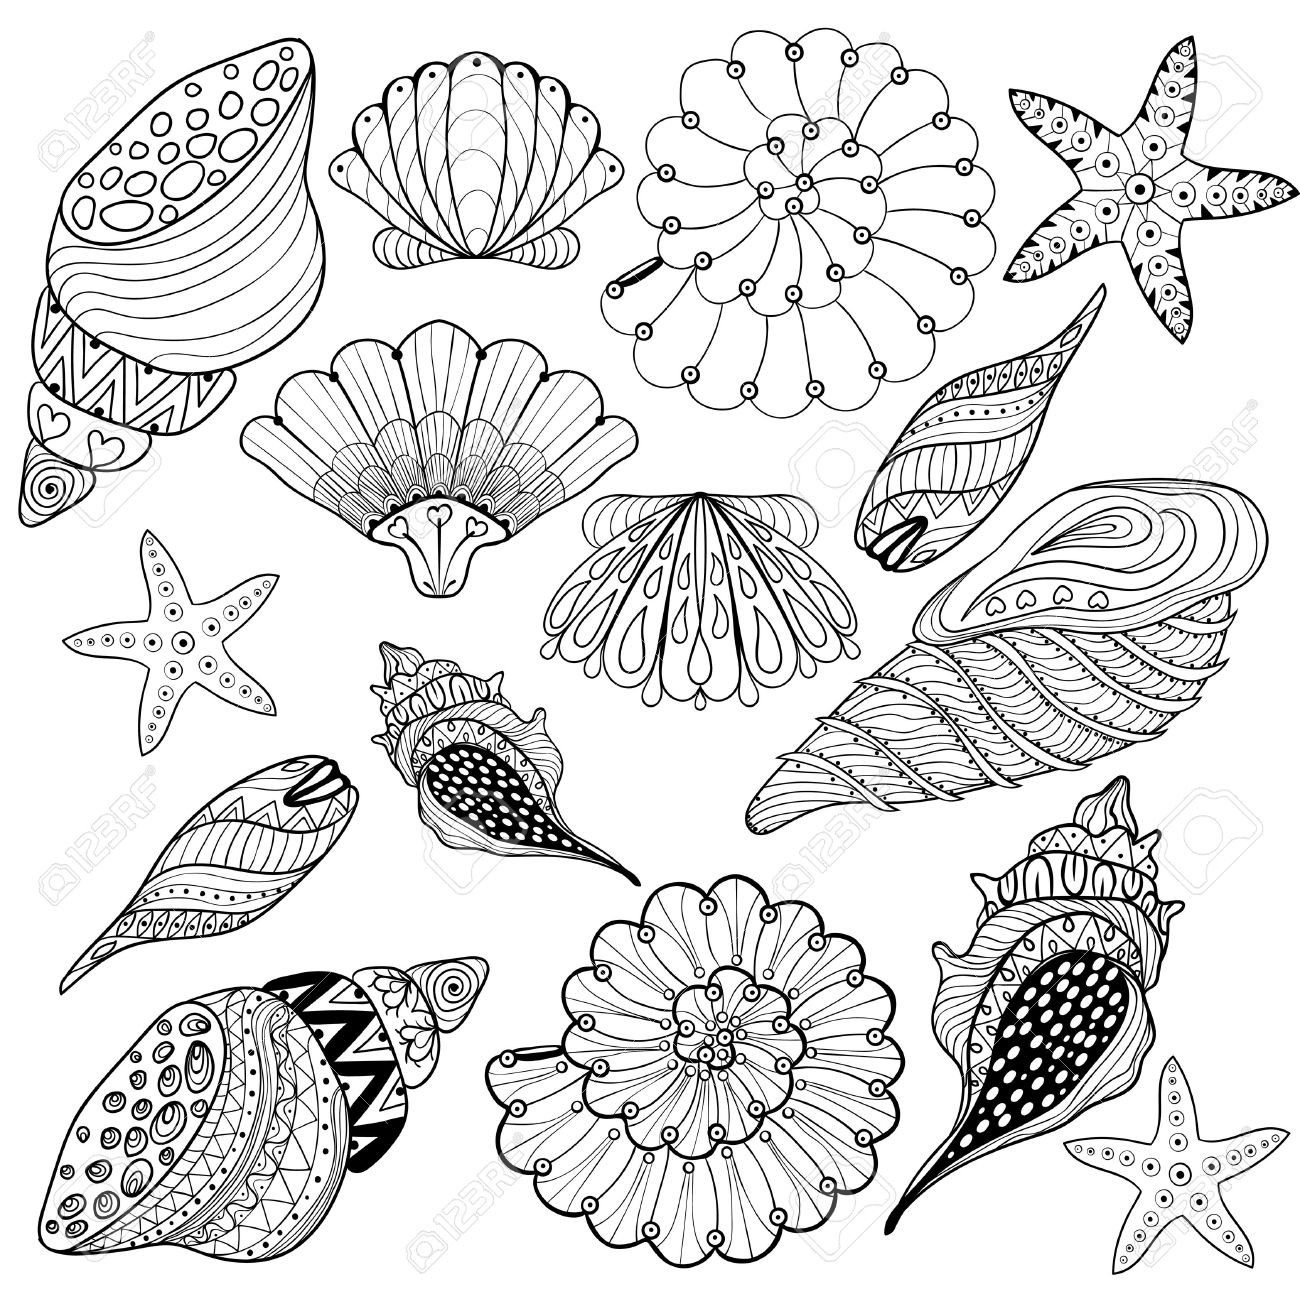 Seashell Coloring Page at GetColorings com Free printable colorings